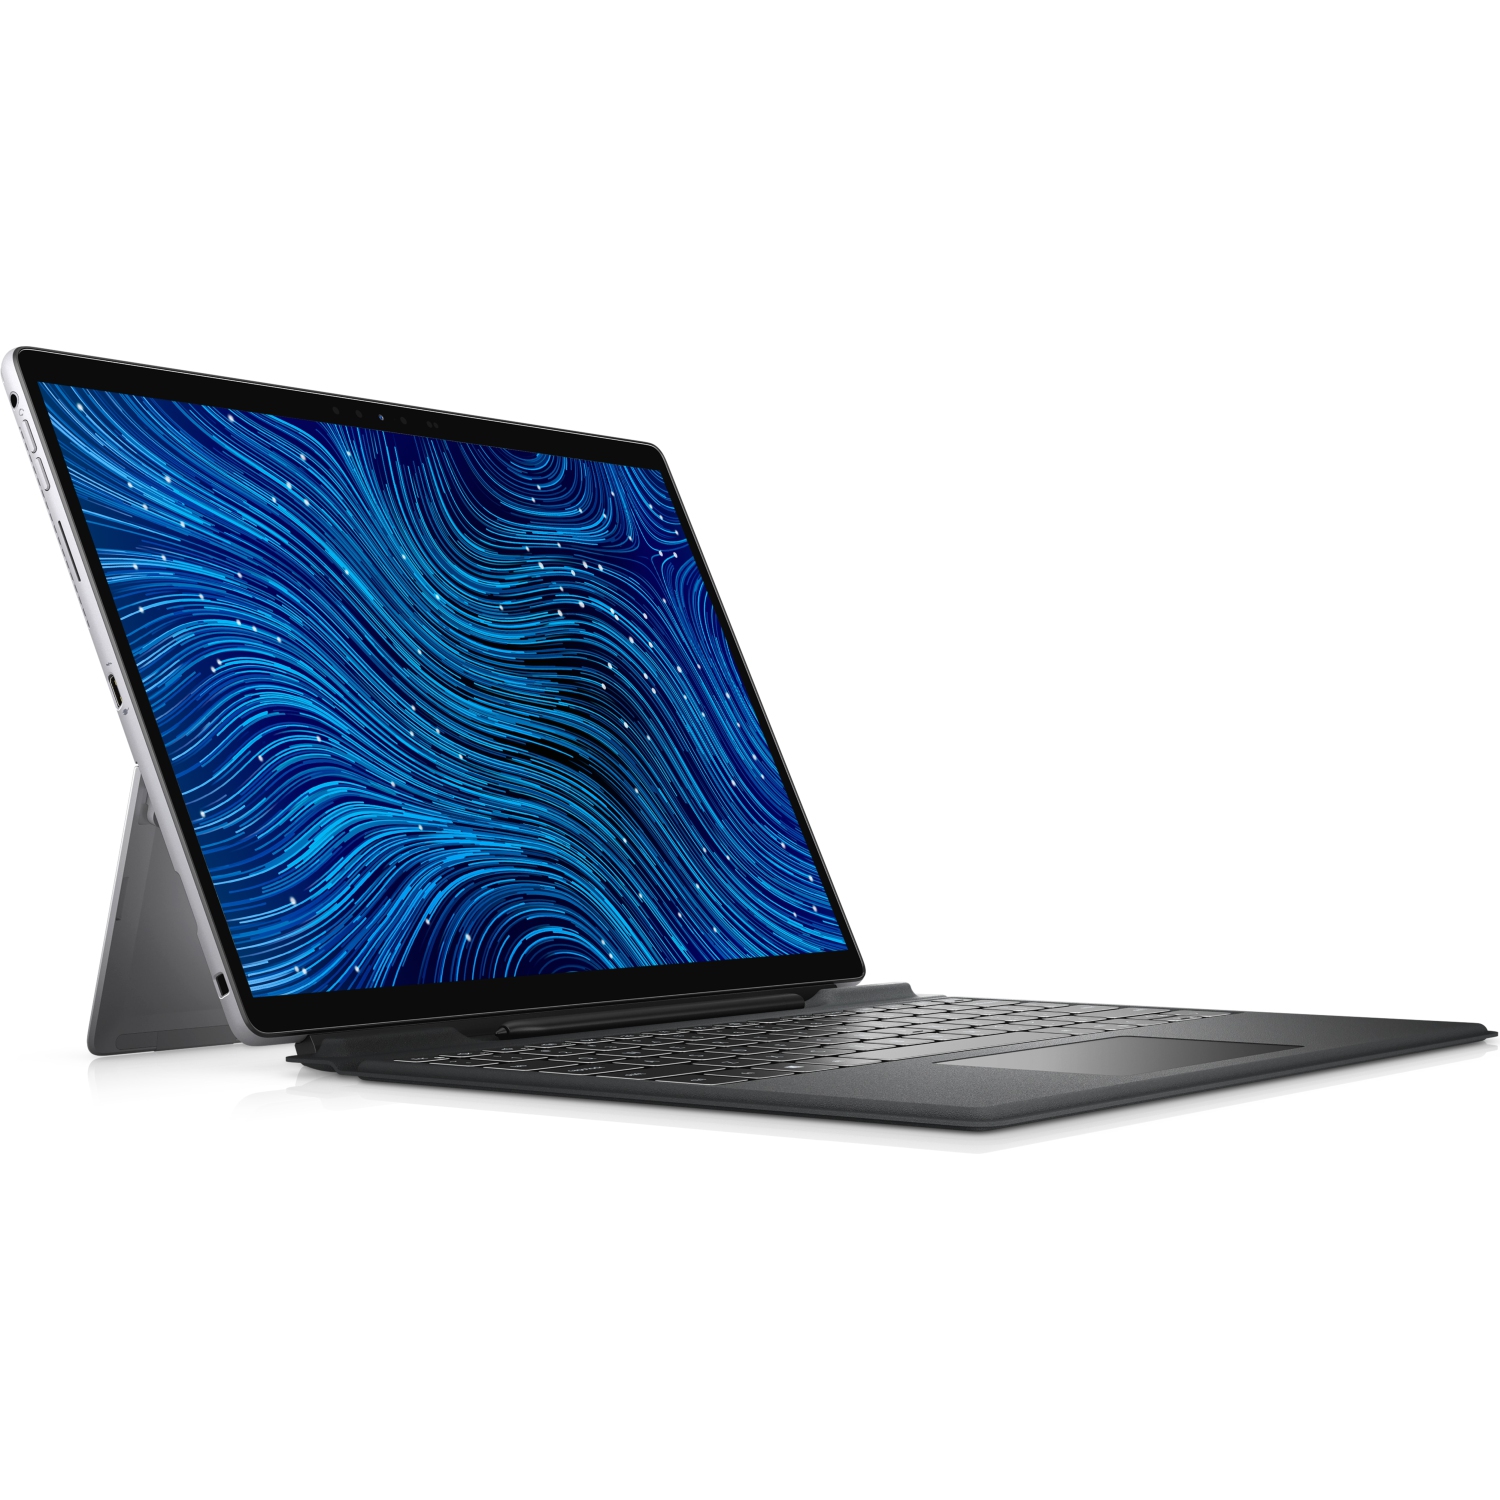 Refurbished (Excellent) - Dell Latitude 7000 7320 Detachable 13 2-in-1 (2021), 13" FHD+ Touch, Core i5, 128GB SSD, 8GB RAM, 4 Cores @ 4 GHz, 11th Gen CPU Certified